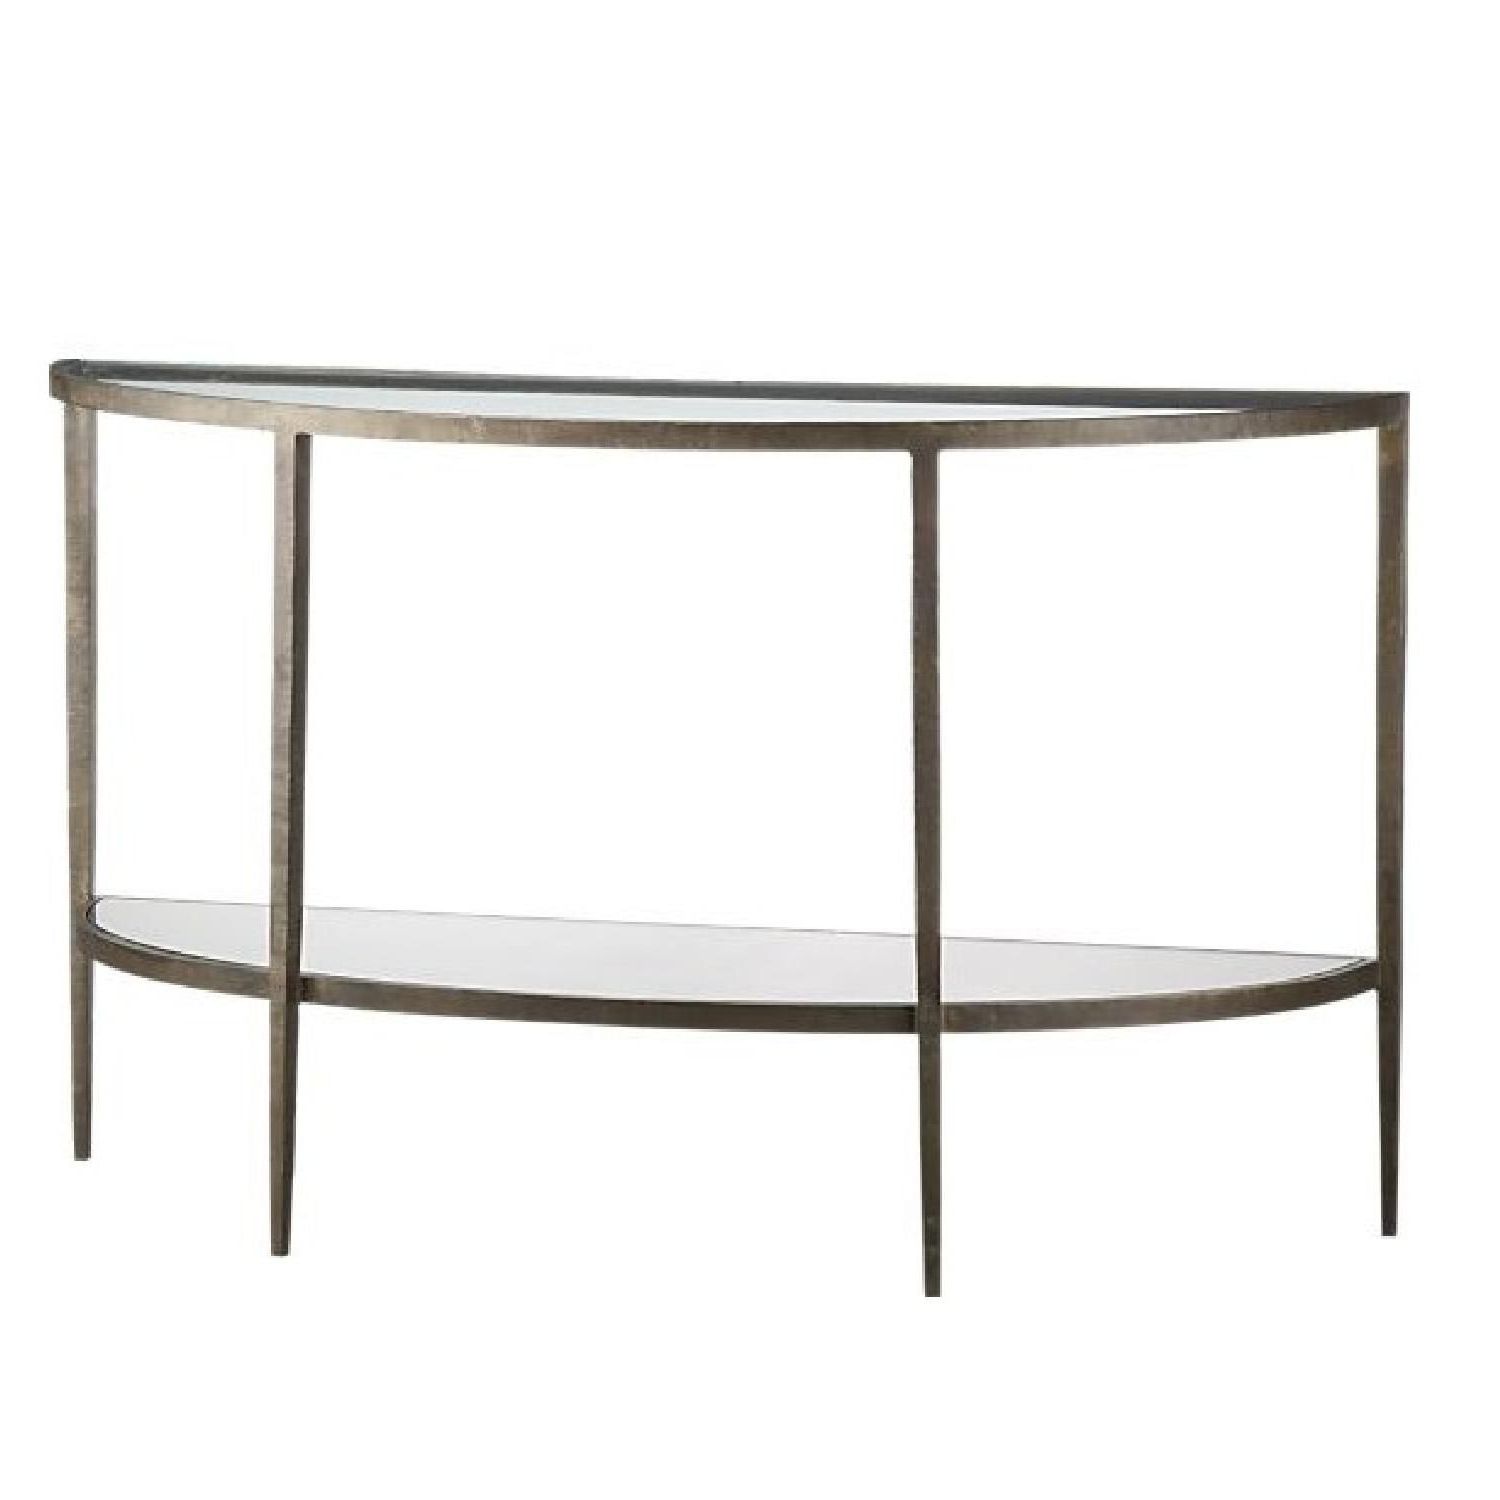 Crate & Barrel Clairemont Demilune Console Table | Coffee, Side Throughout Clairemont Demilune Console Tables (View 1 of 20)